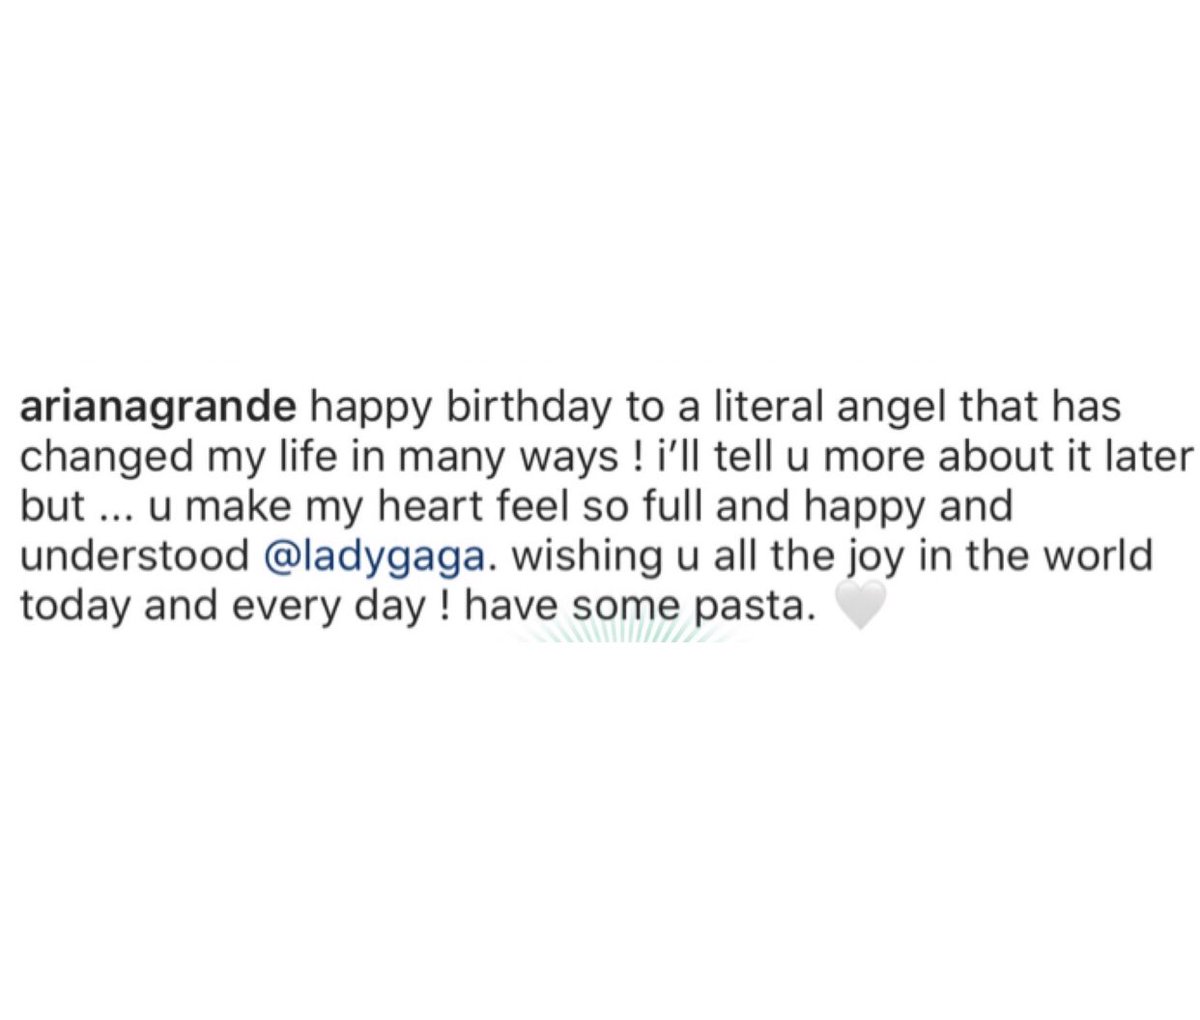 Ariana posted this birthday message to Gaga last month, along with a picture of the two in the studio